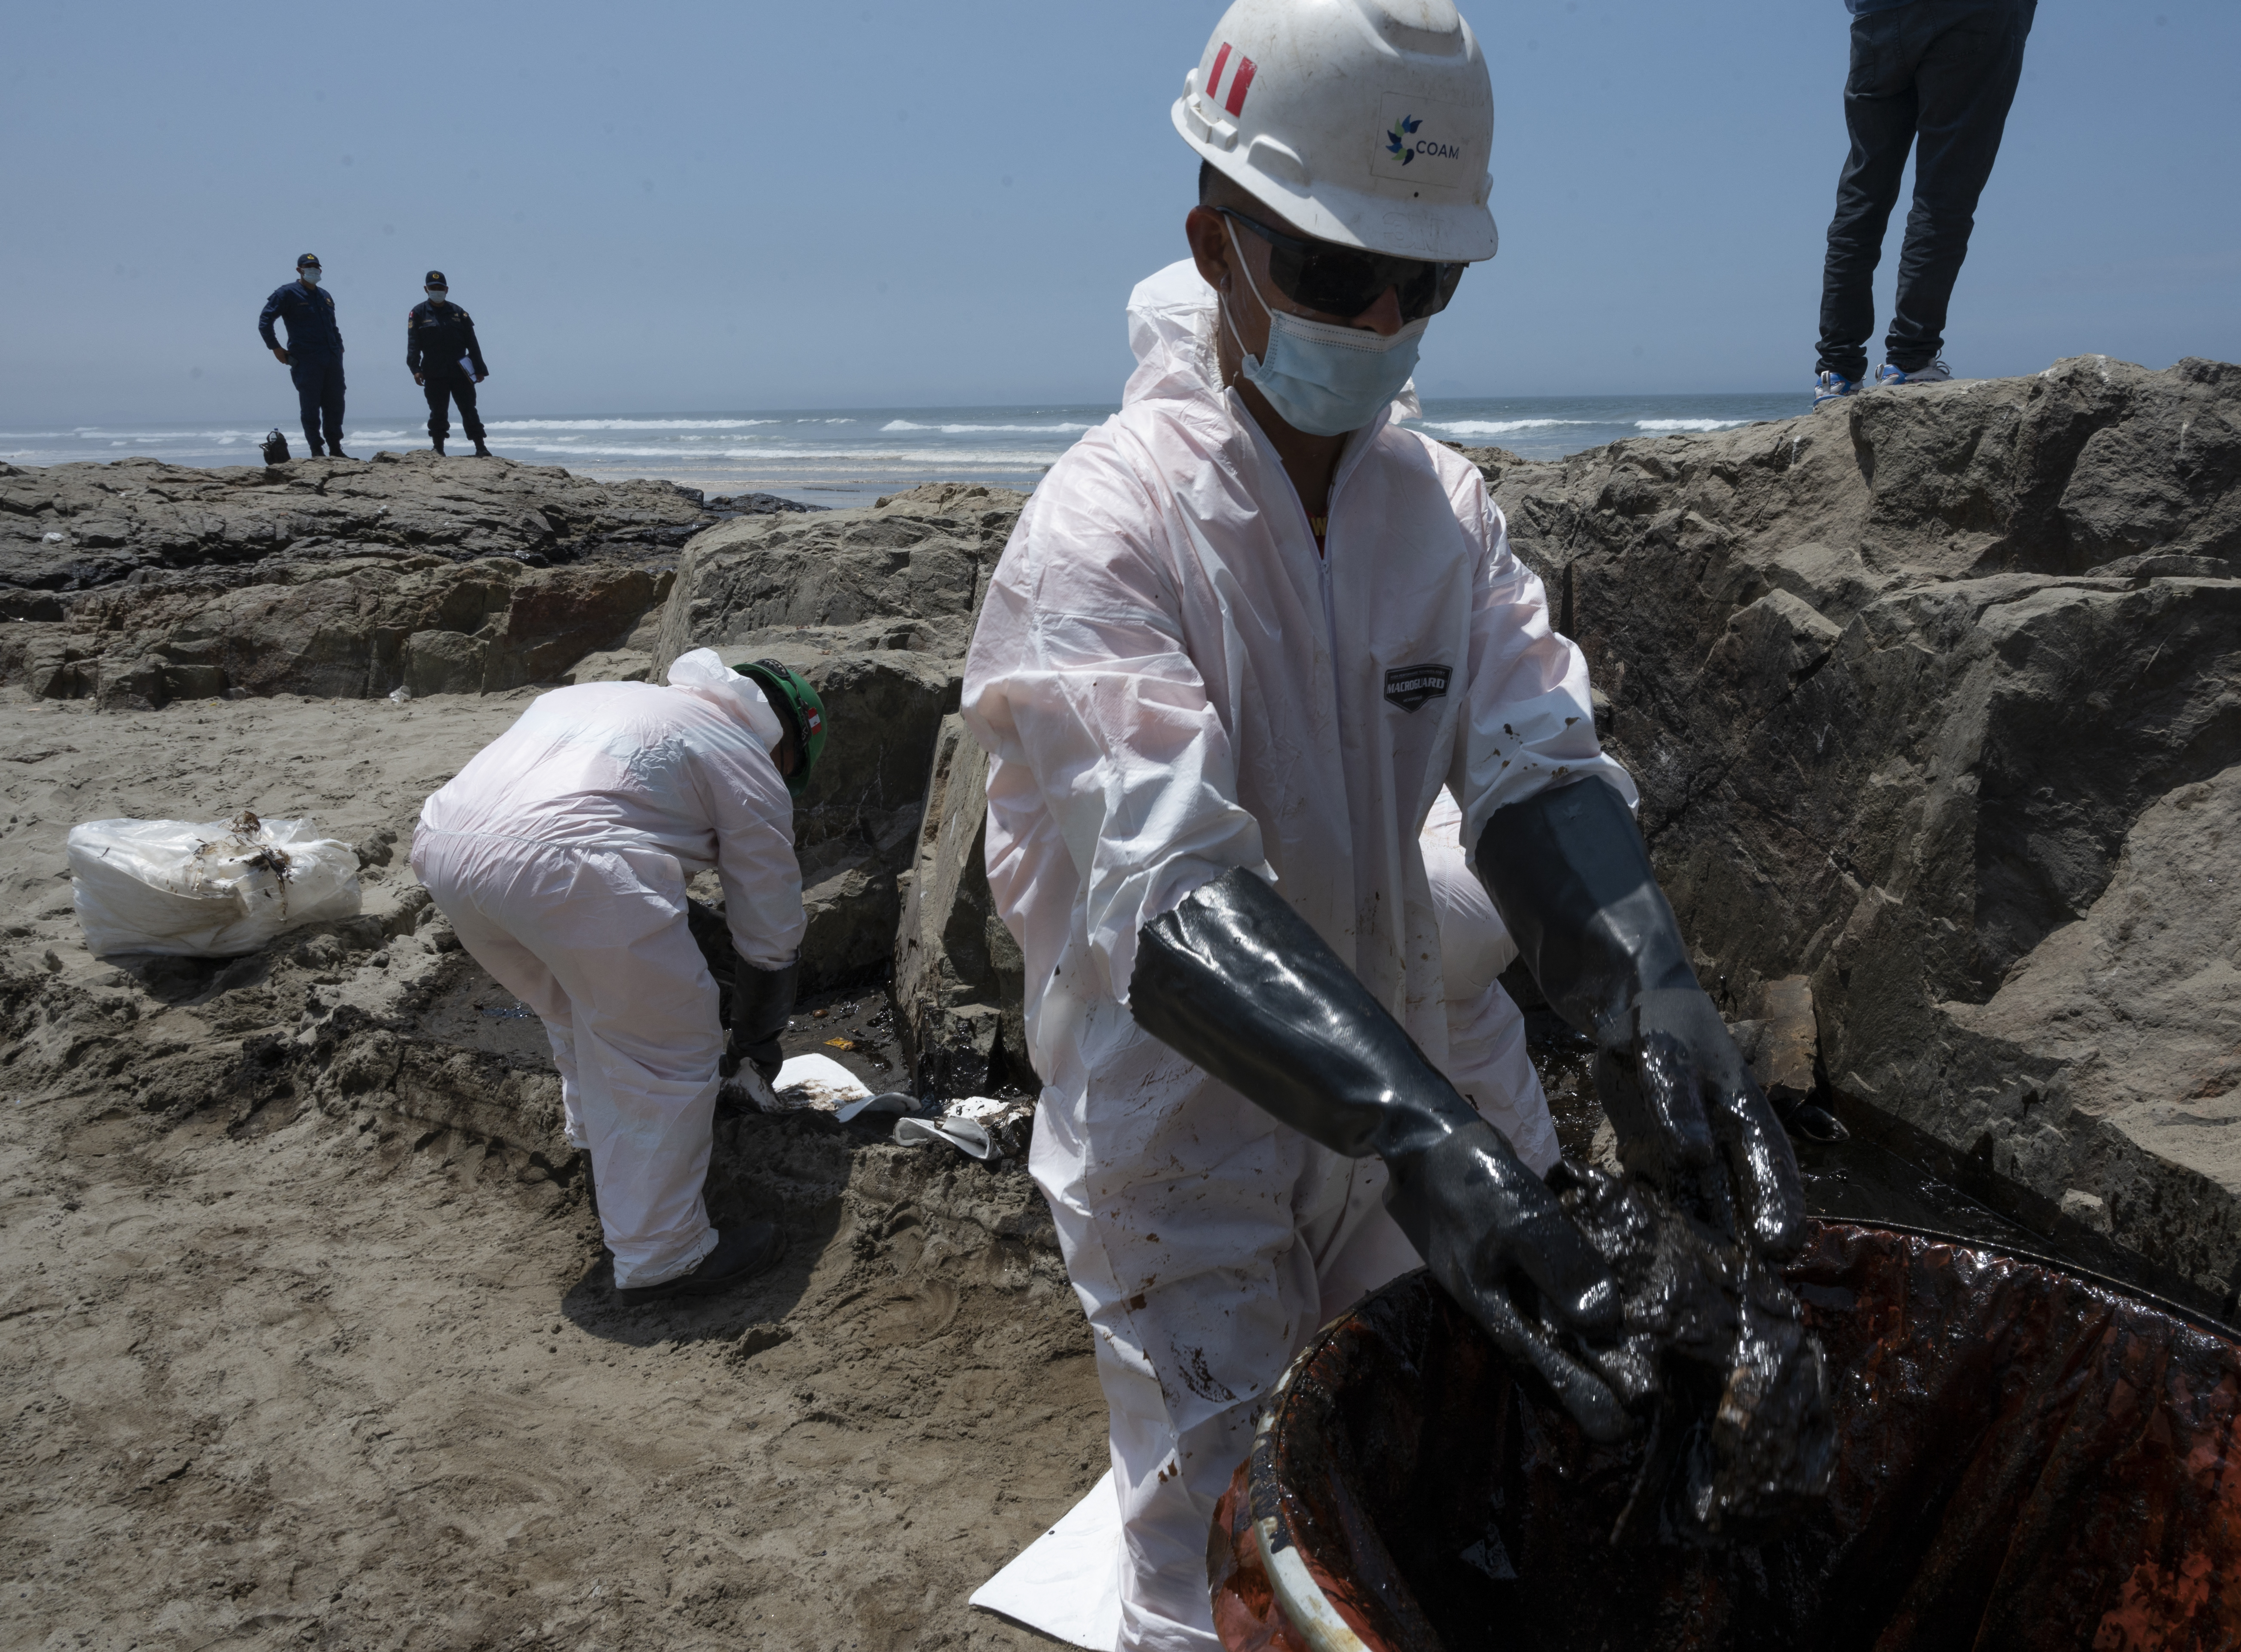 Cleaning crews work to remove oil from a beach in the Peruvian province of Callao on January 17, 2022, after a spill which occurred during the unloading process of the Italian-flagged tanker "Mare Doricum" at La Pampilla refinery caused by the abnormal waves recorded after the volcanic eruption in Tonga. - A massive volcanic eruption in Tonga triggered tsunami waves around the Pacific, with waves strong enough to drown two women in Peru, more than 10,000 kilometres (6,000 miles) away. (Photo by Cris BOURONCLE / AFP)